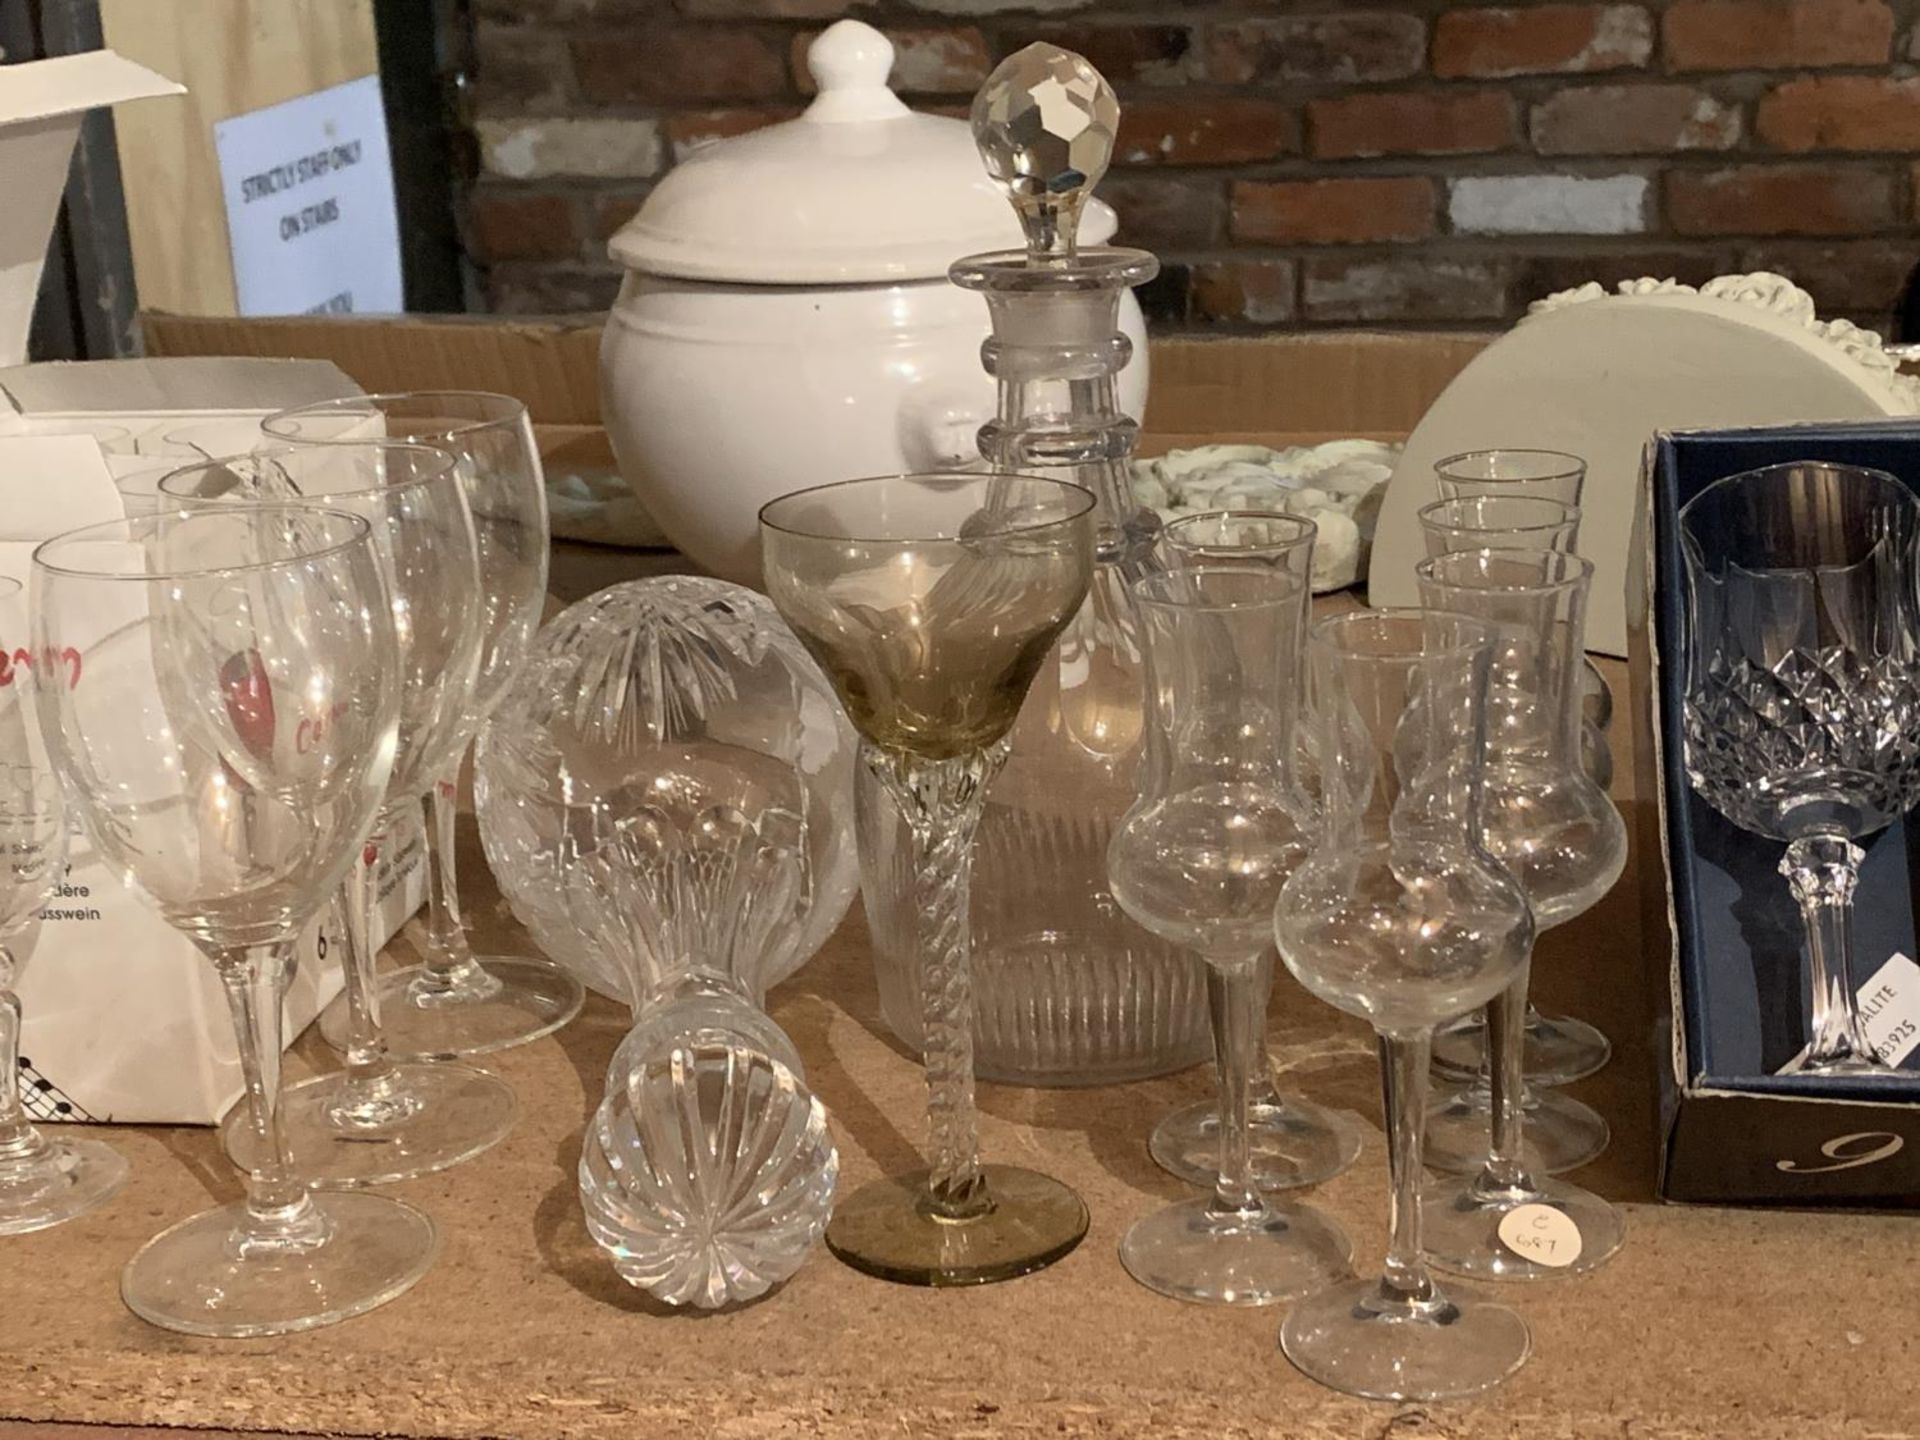 A LARGE COLLECTION OF WINE GLASSES AND A DECANTER - Image 5 of 6